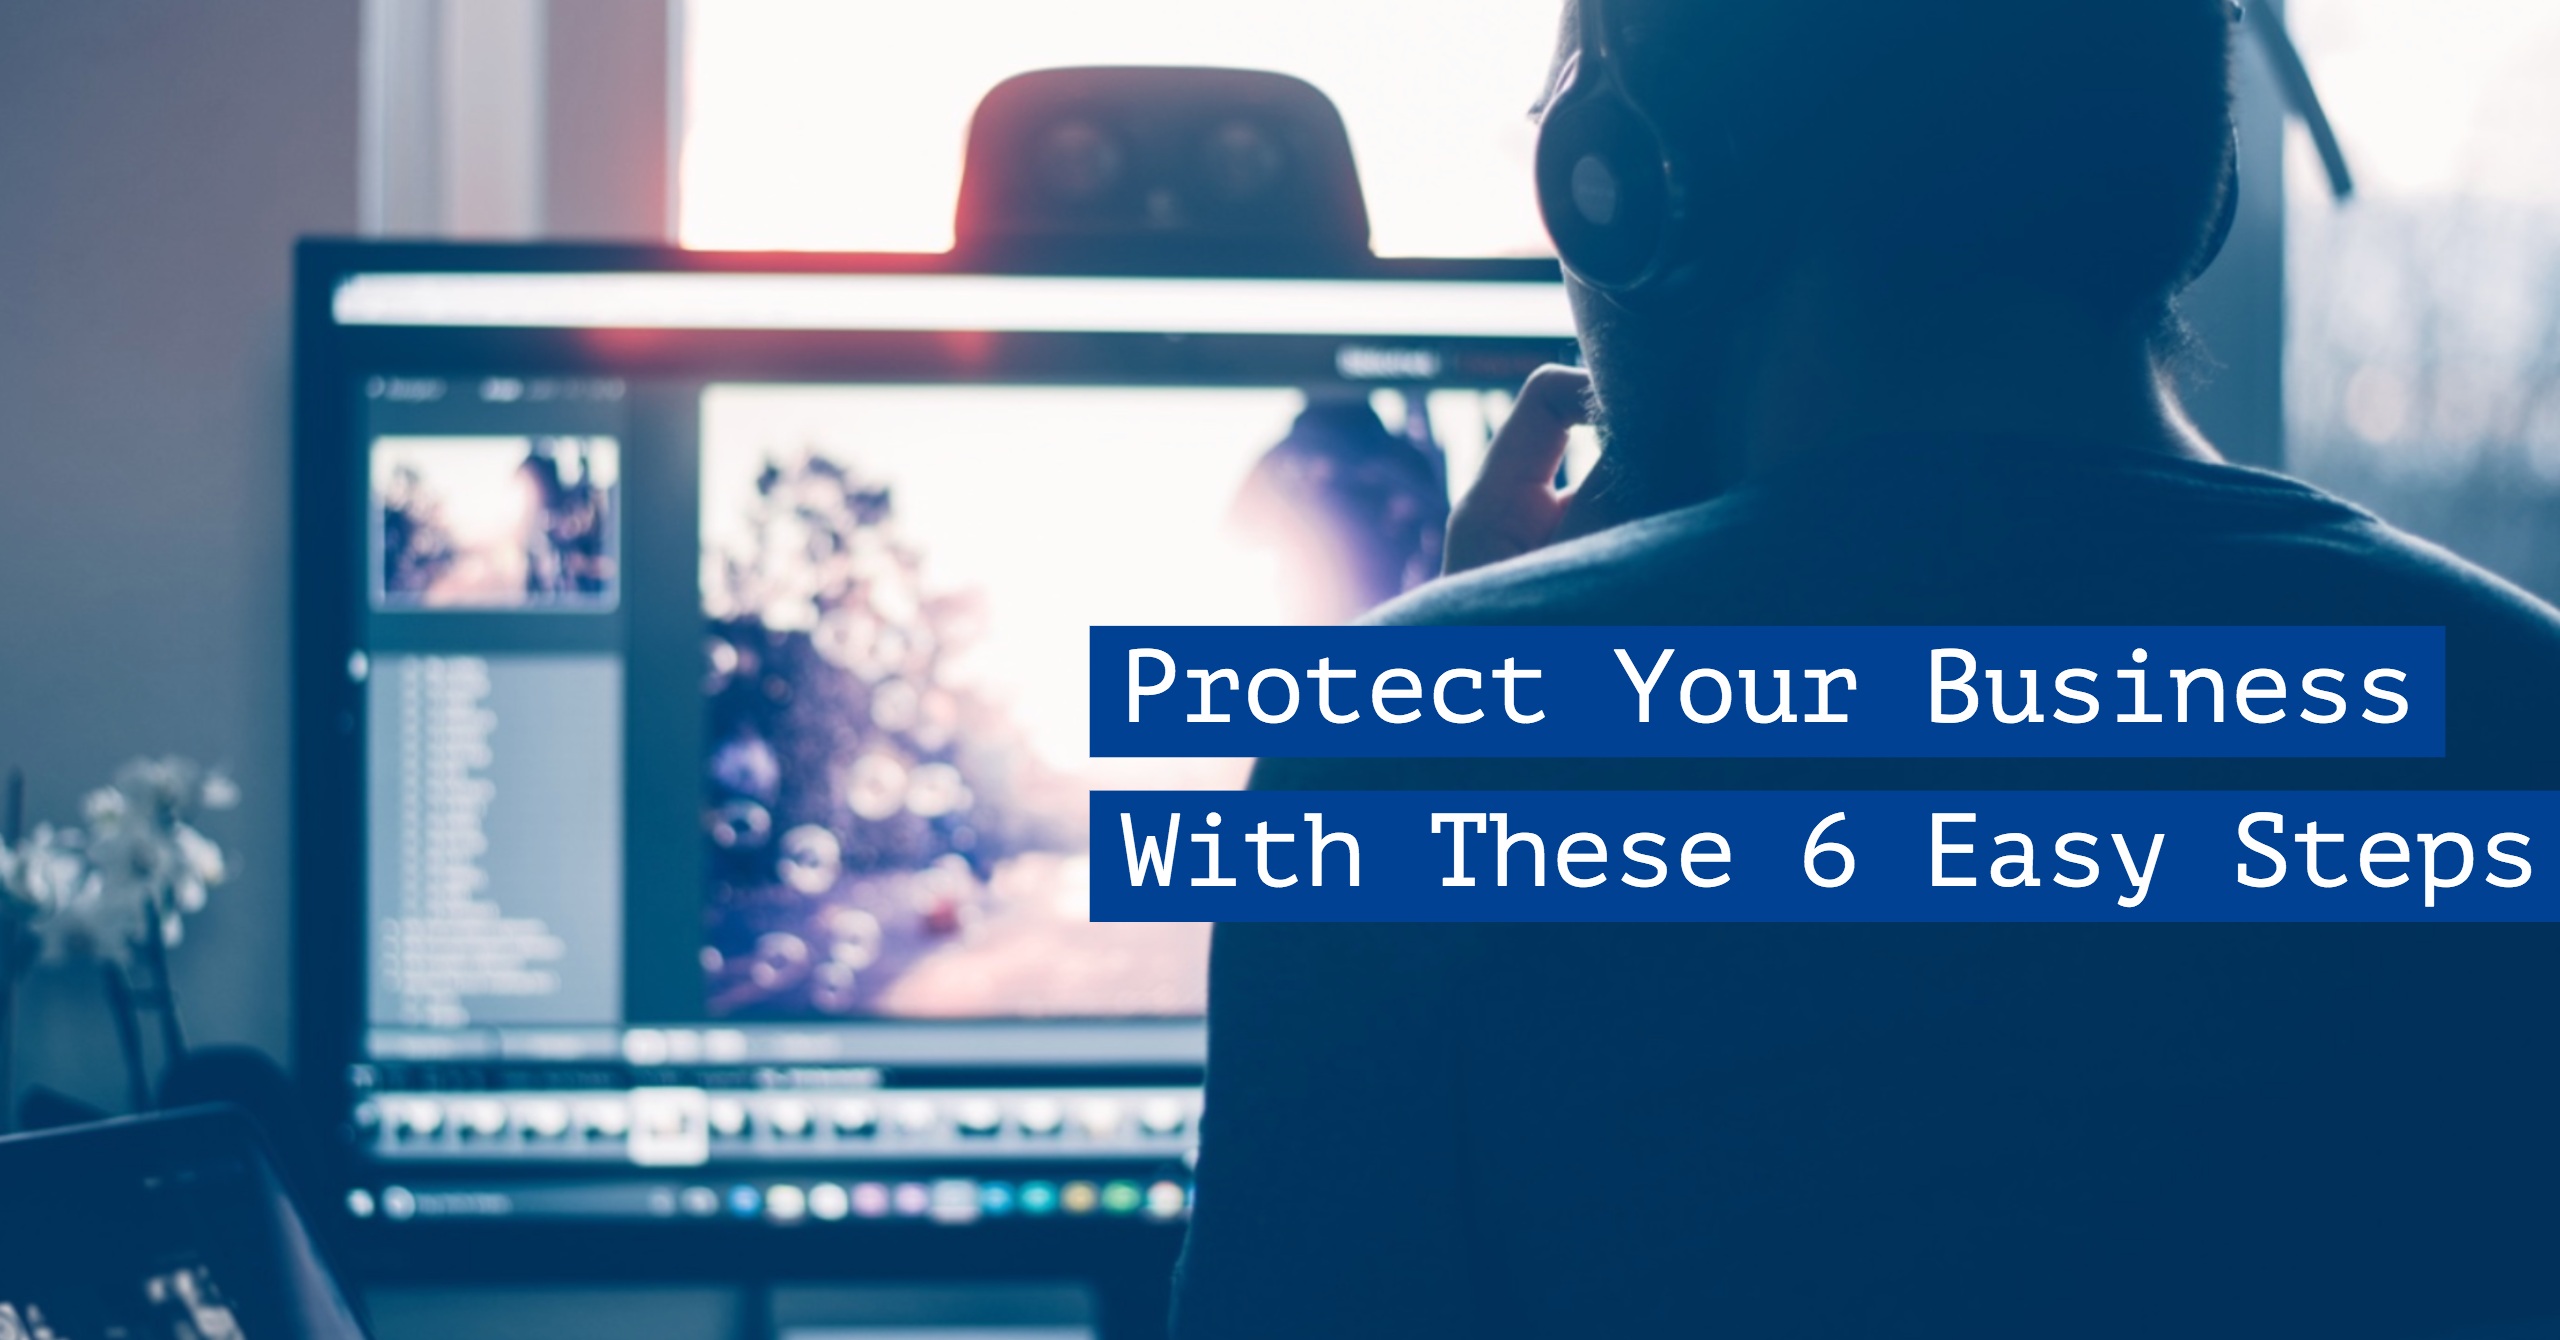 Protect Your Business With These 6 Easy Steps